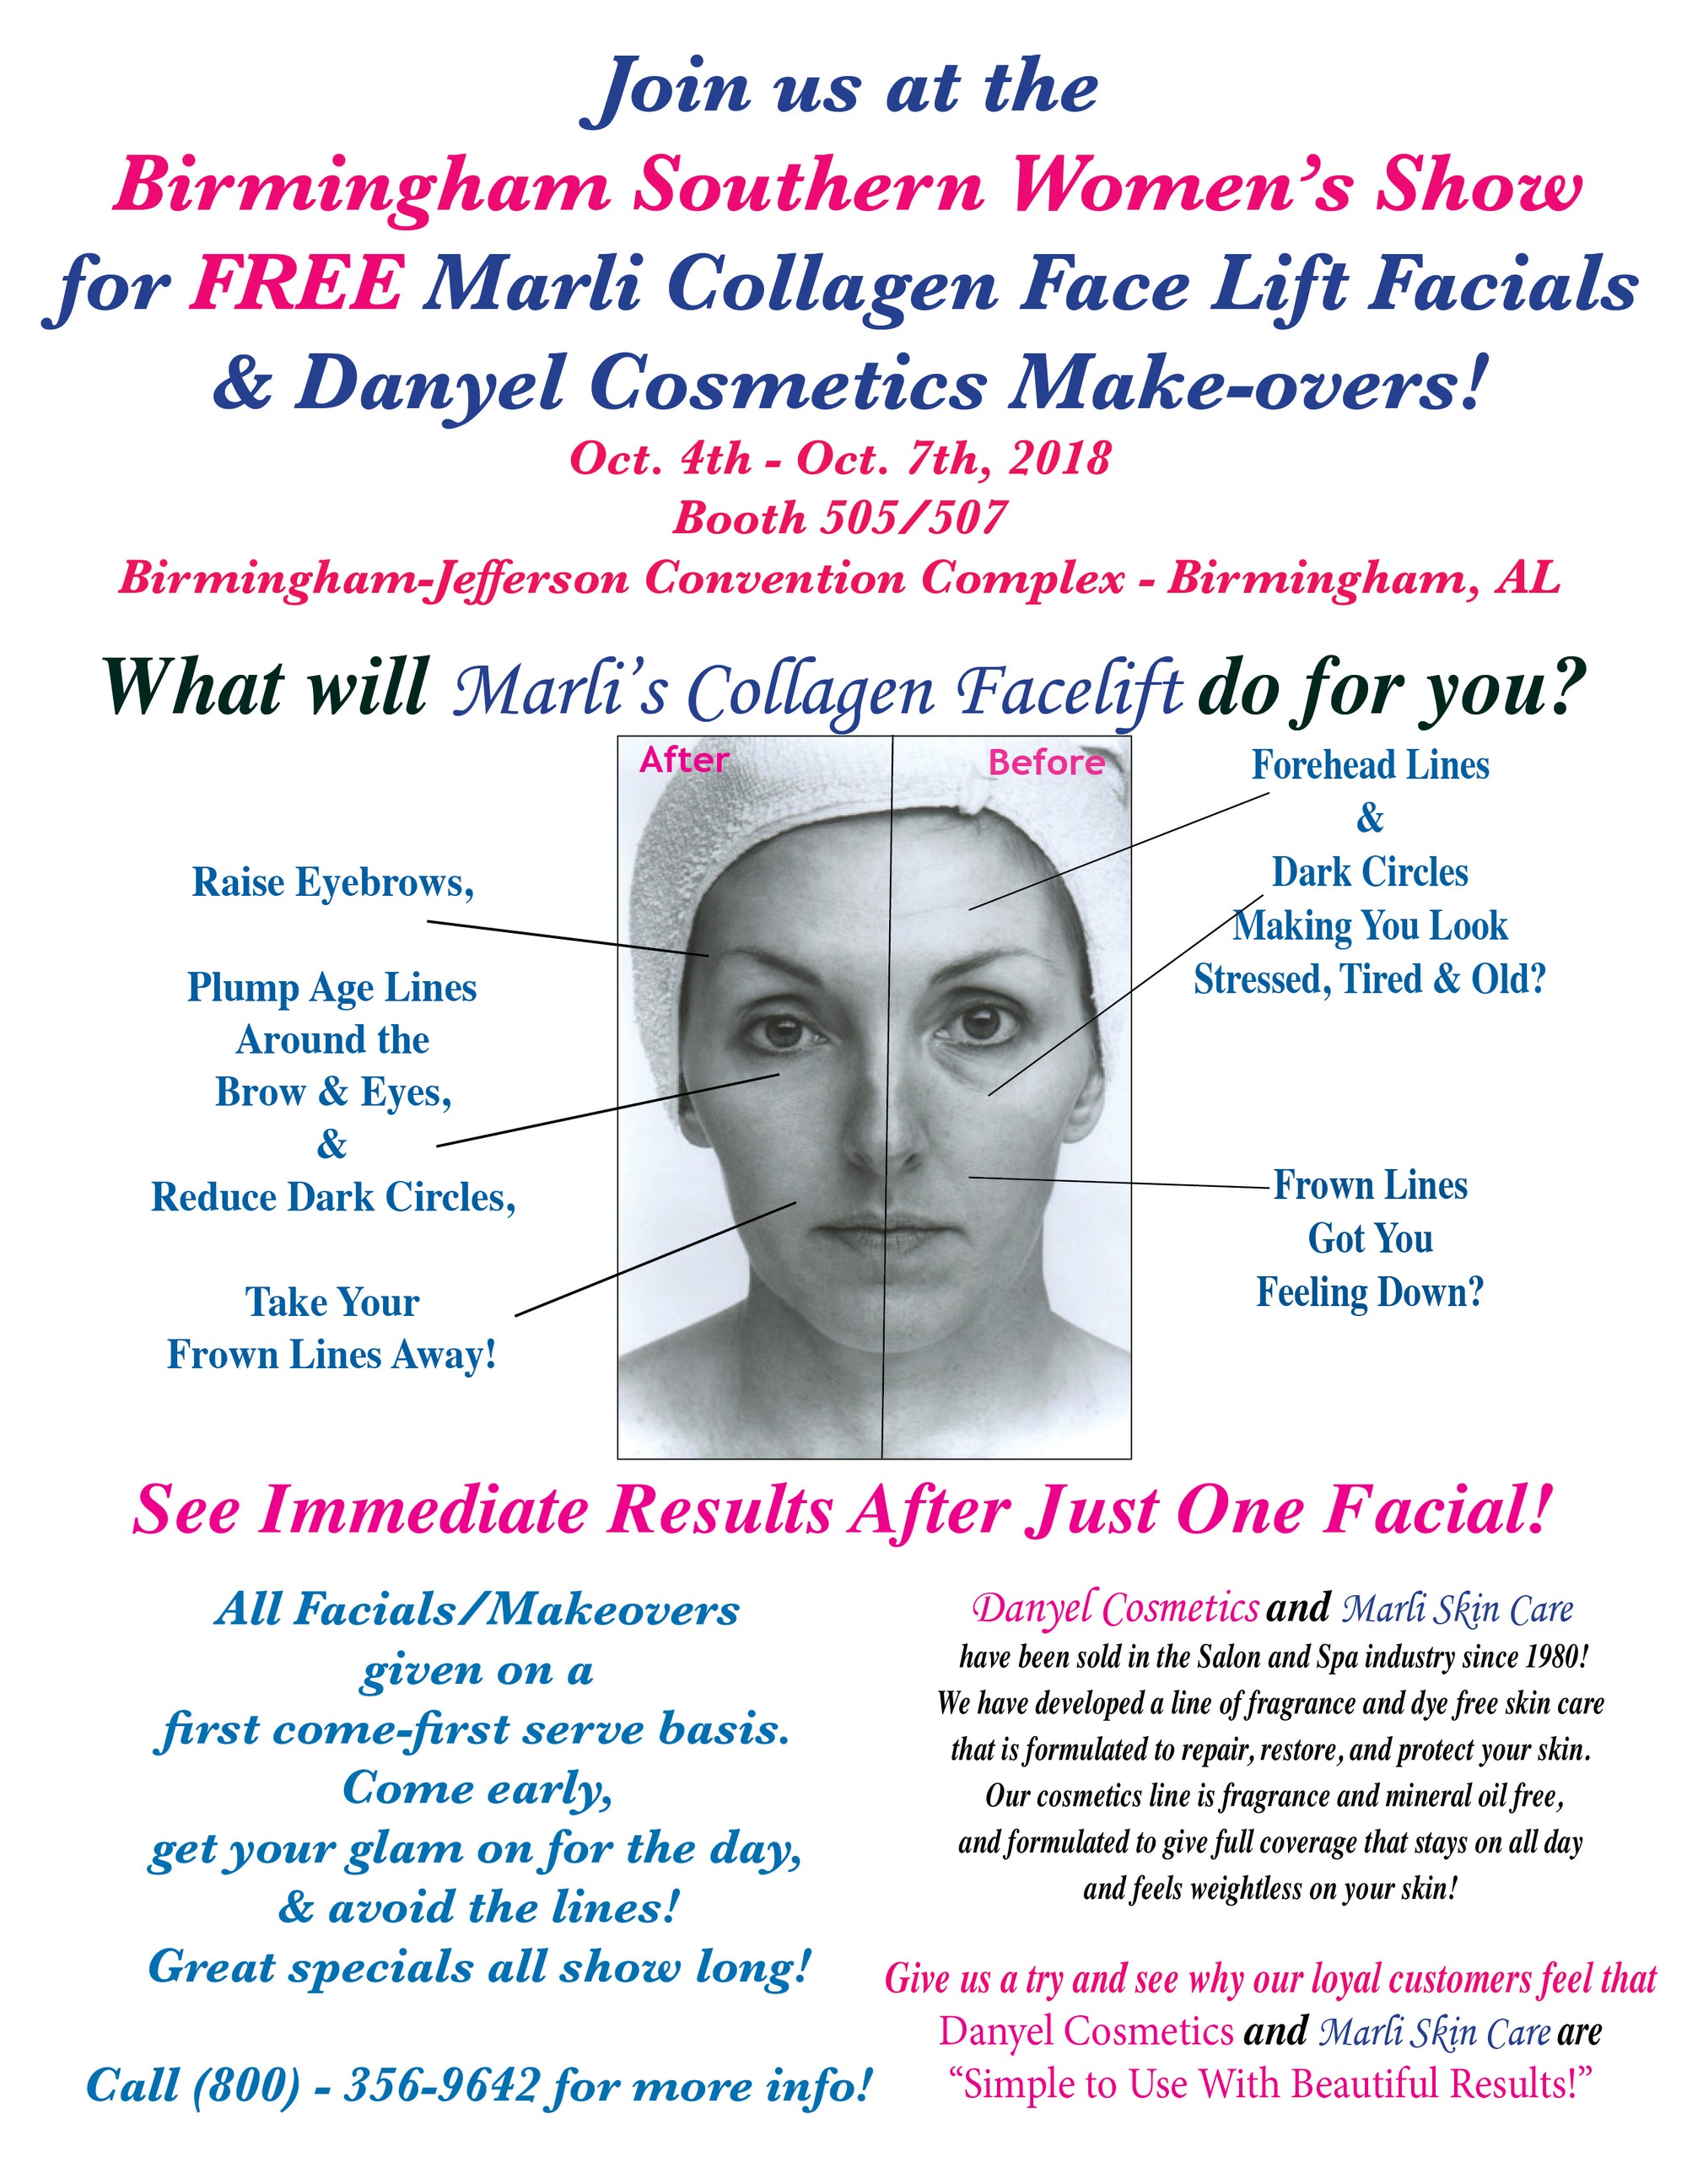 Free Collagen Facials & Makeovers At the Southern Women's Show in Birmingham!